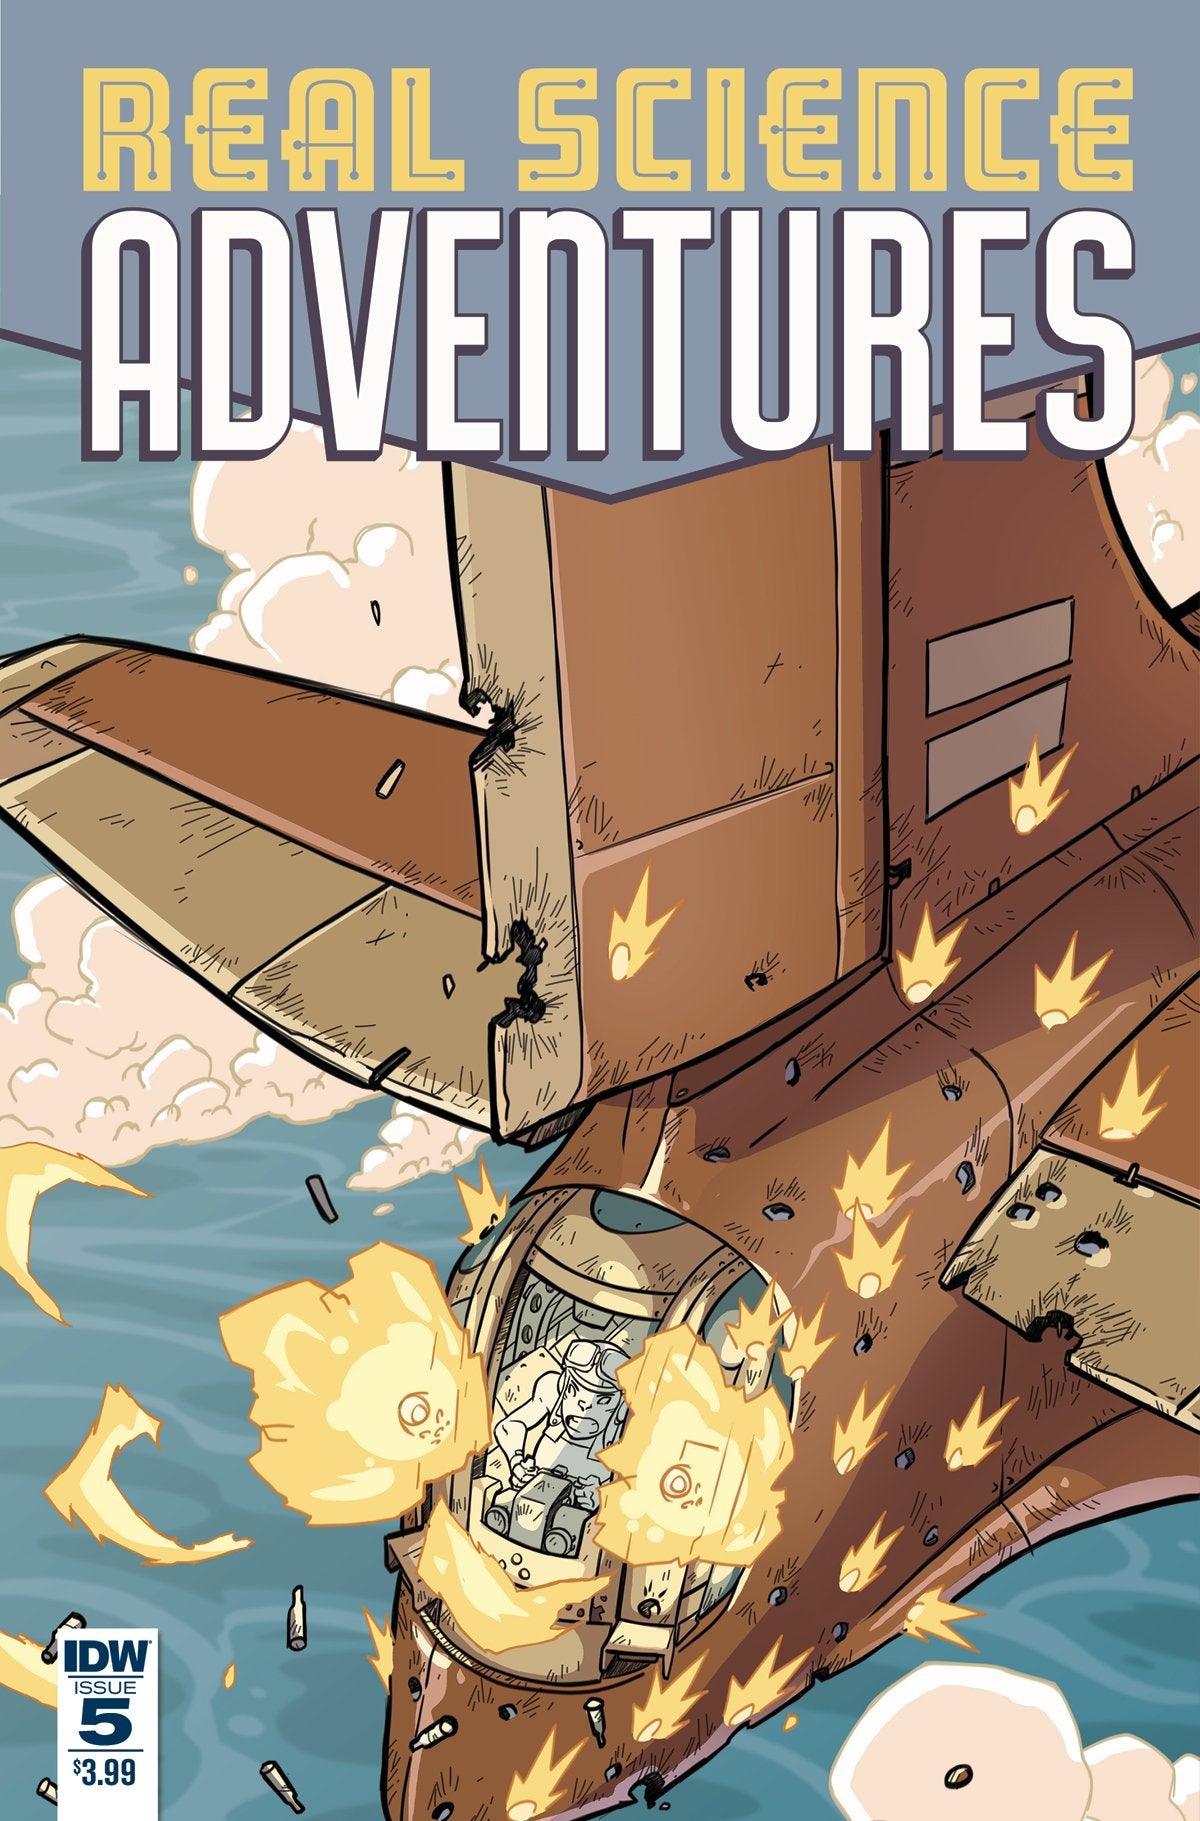 REAL SCIENCE ADVENTURES FLYING SHE-DEVILS #5 (OF 6) COVER A COVER